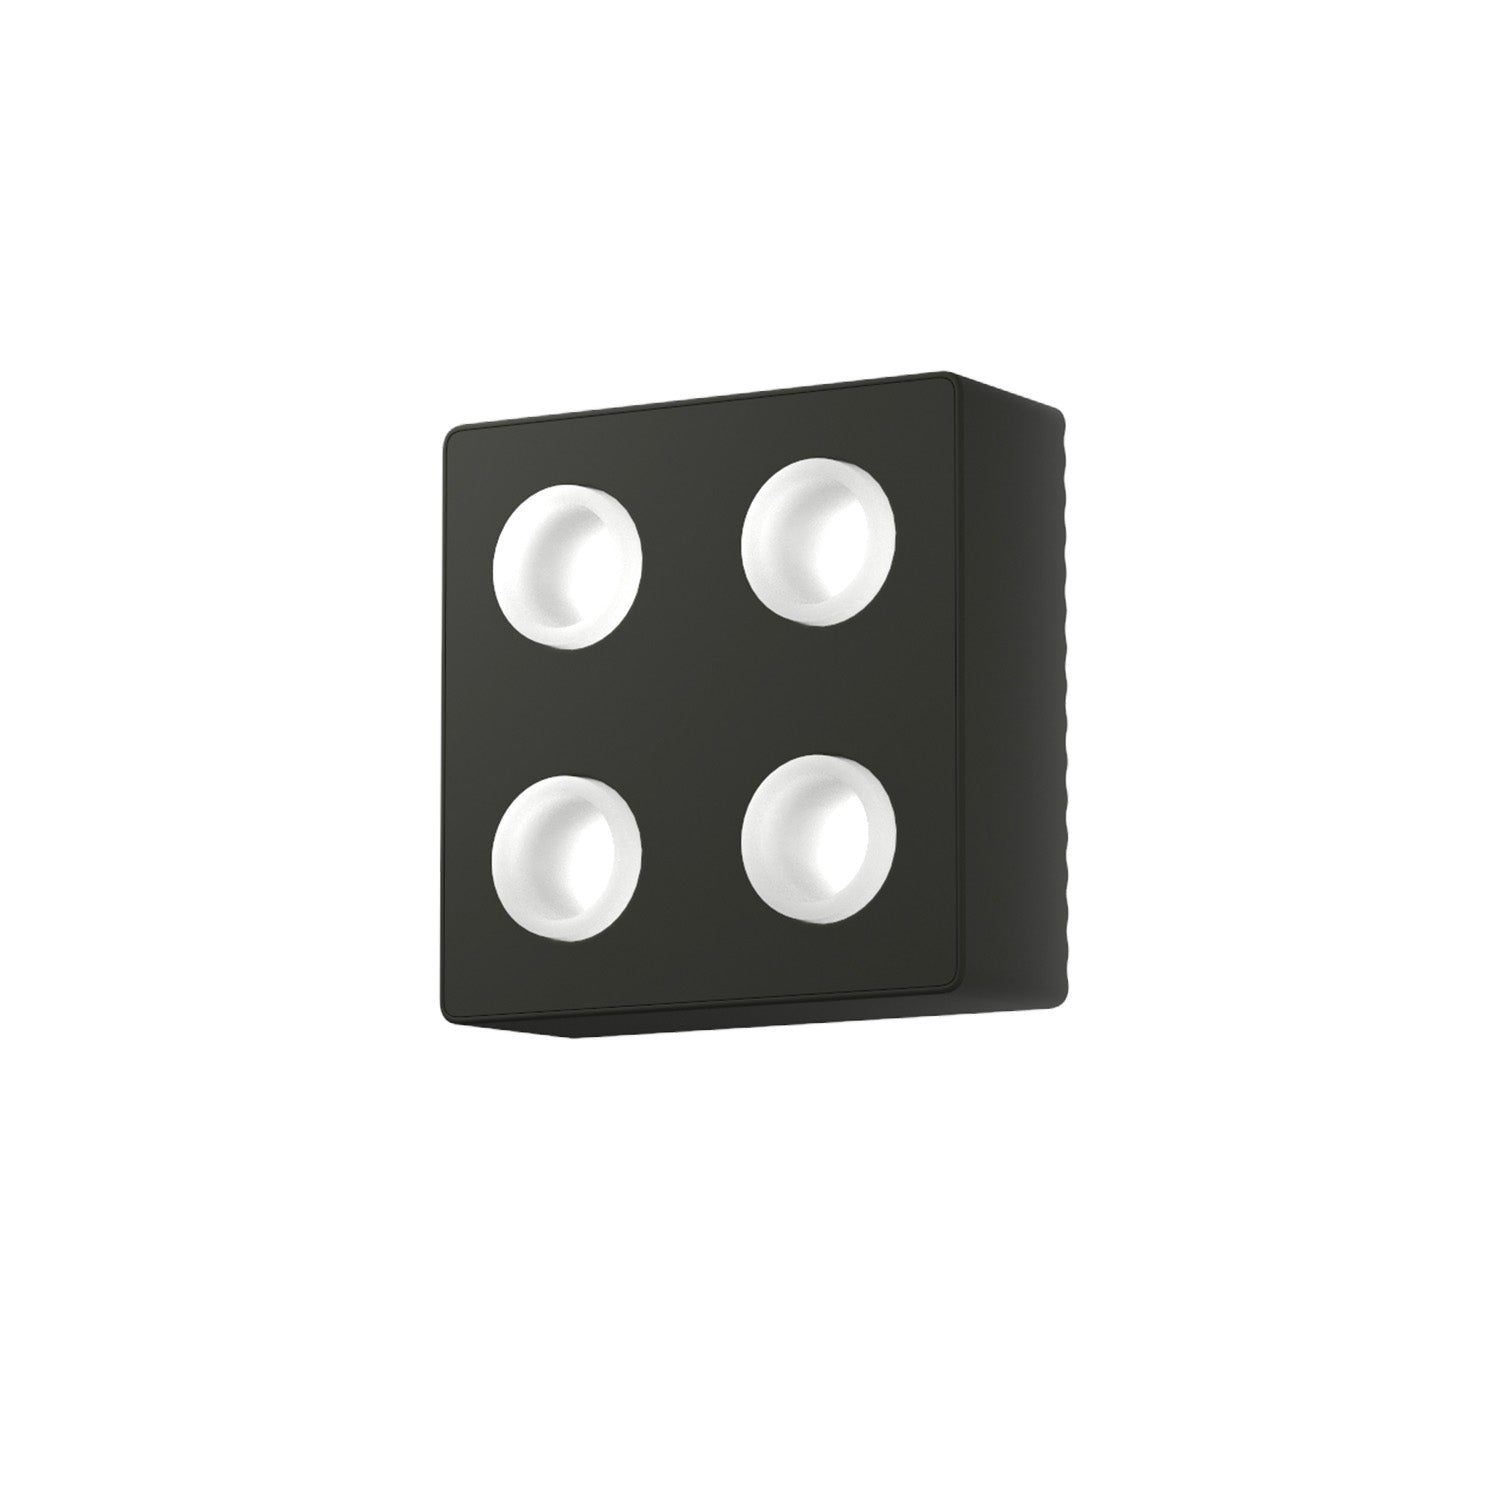 DOMINO - Wall light in the shape of a lego or domino